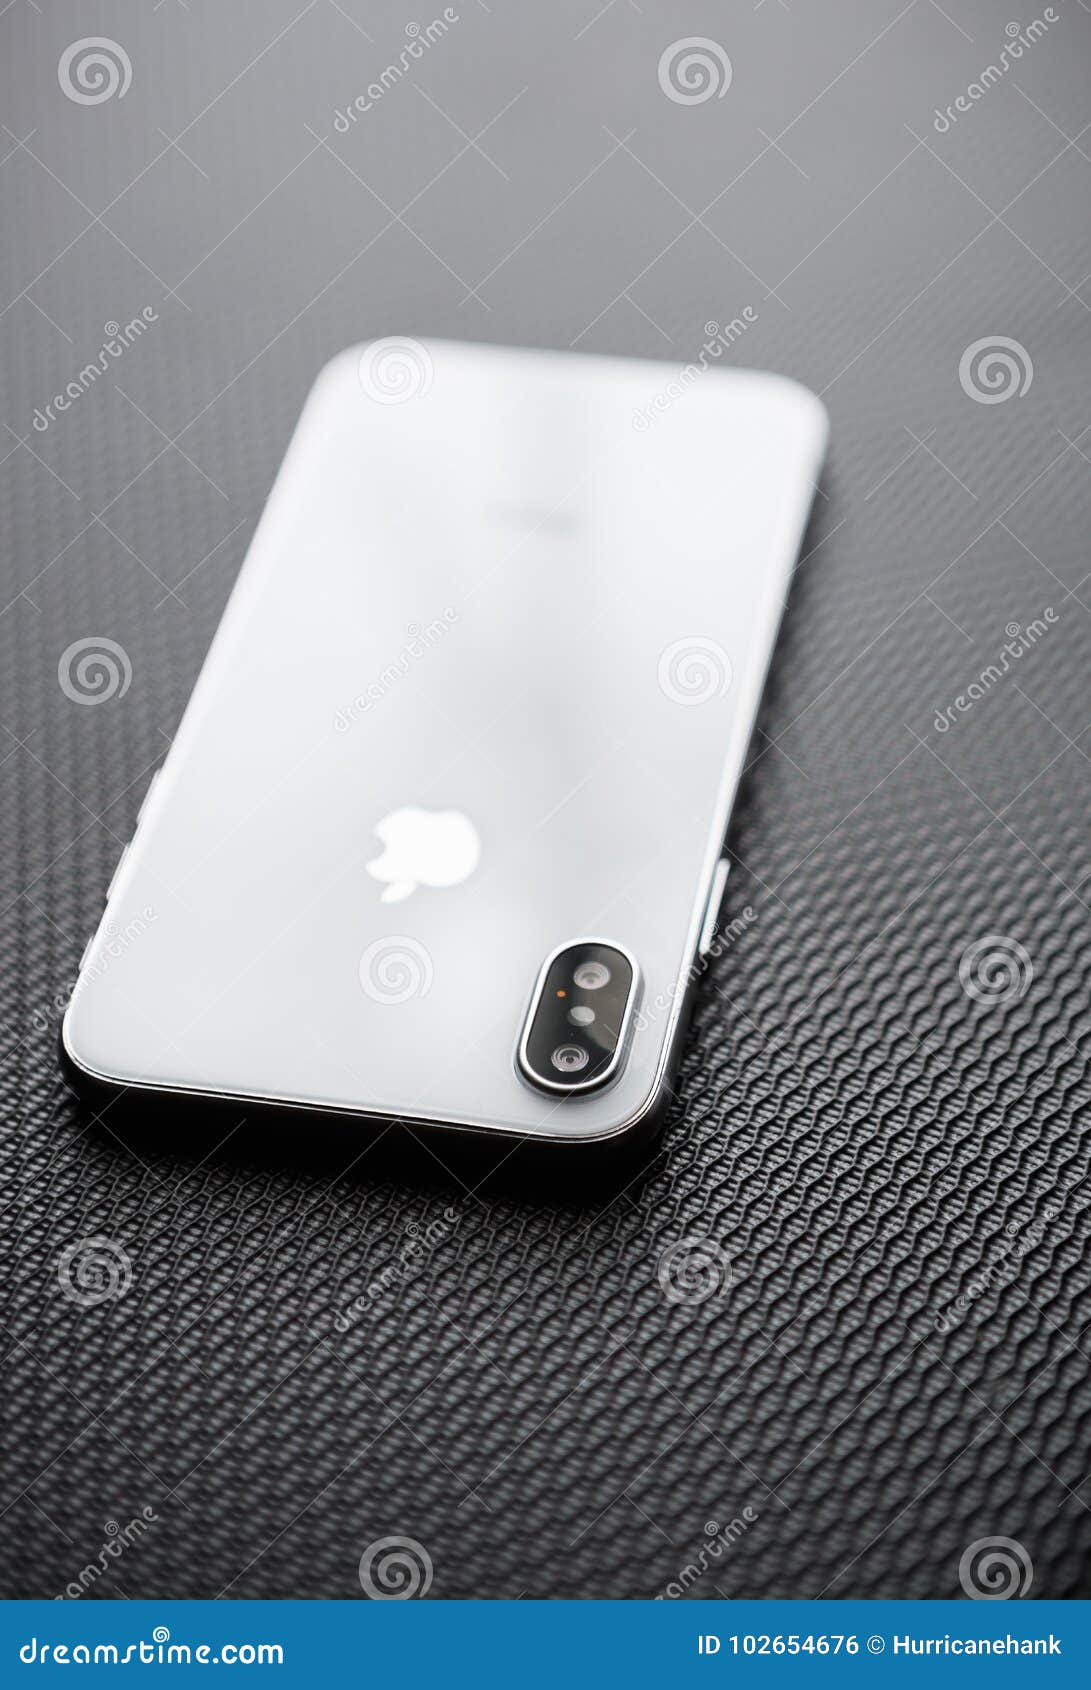 New White Iphone X Phone Concept with Dual Camera Editorial Photo ...